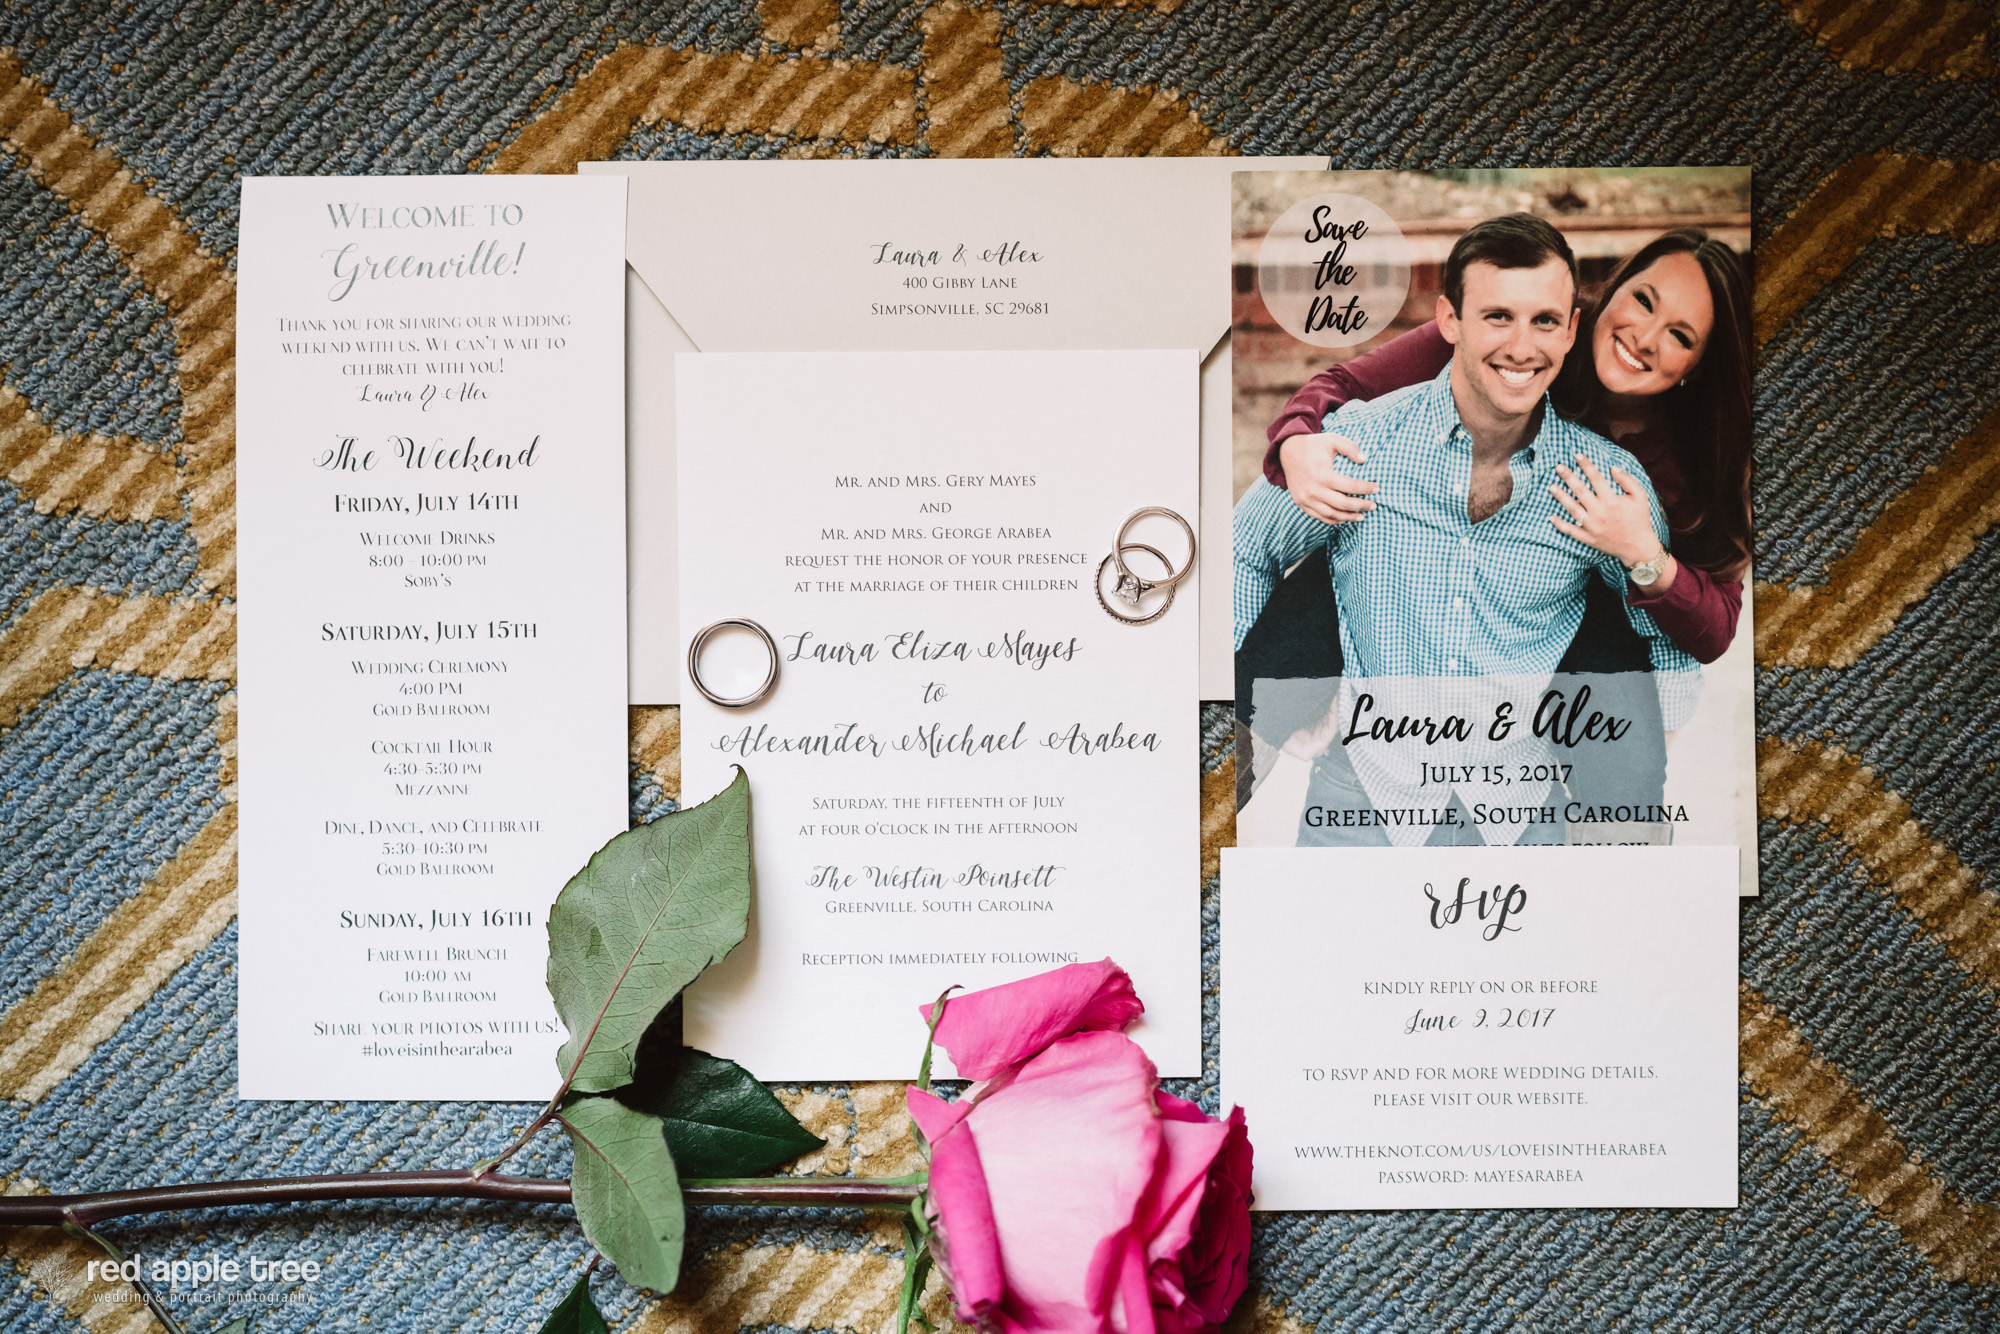  Love this wedding stationary layout! Formal, but FRESH! 